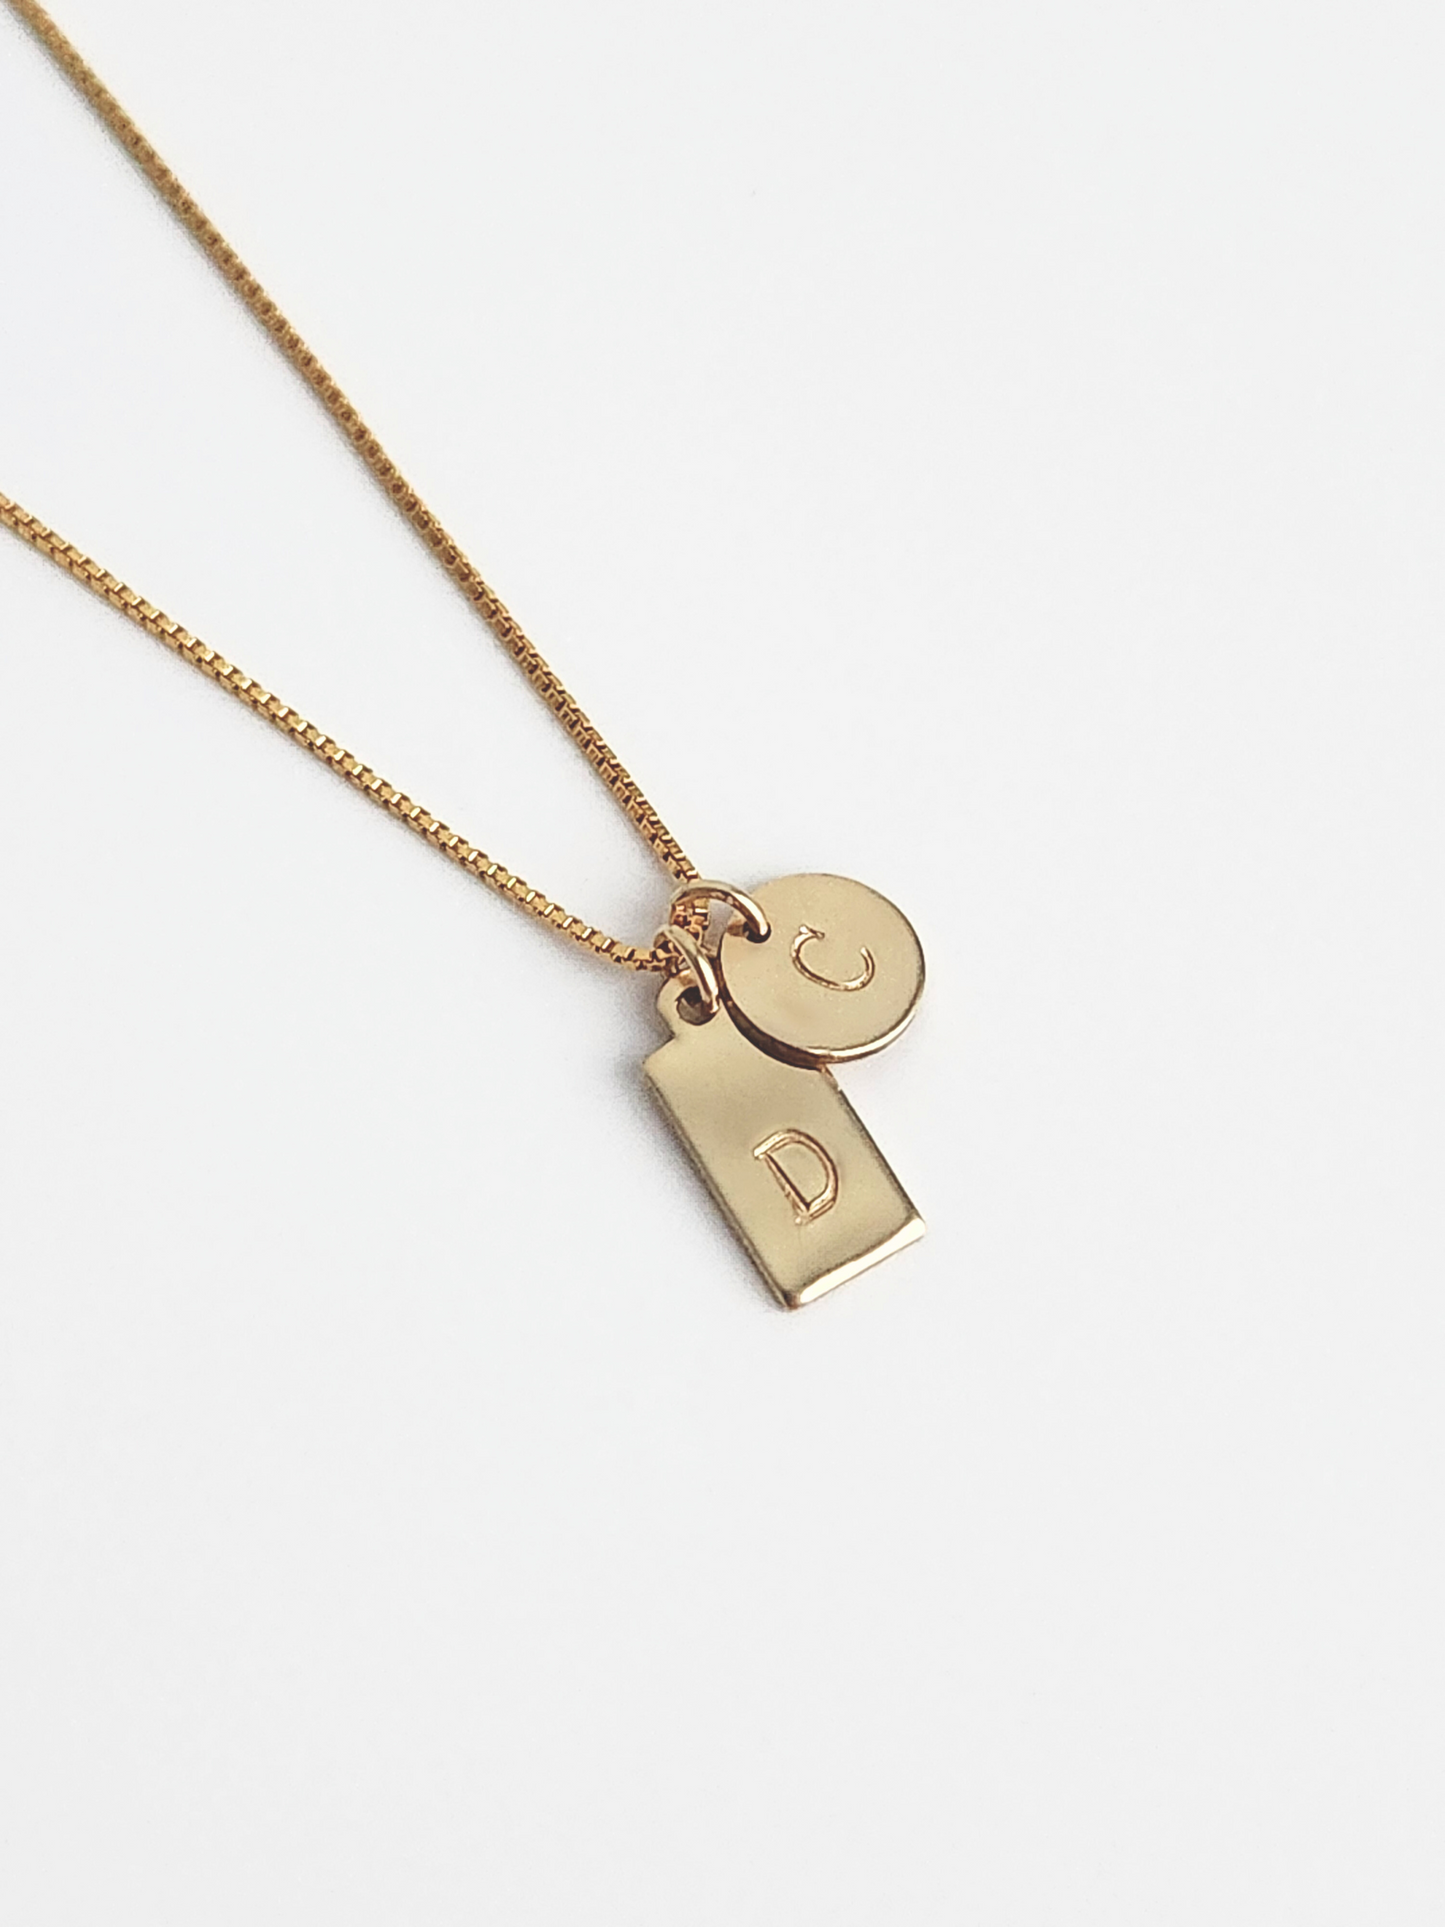 Hand-Stamped Necklace